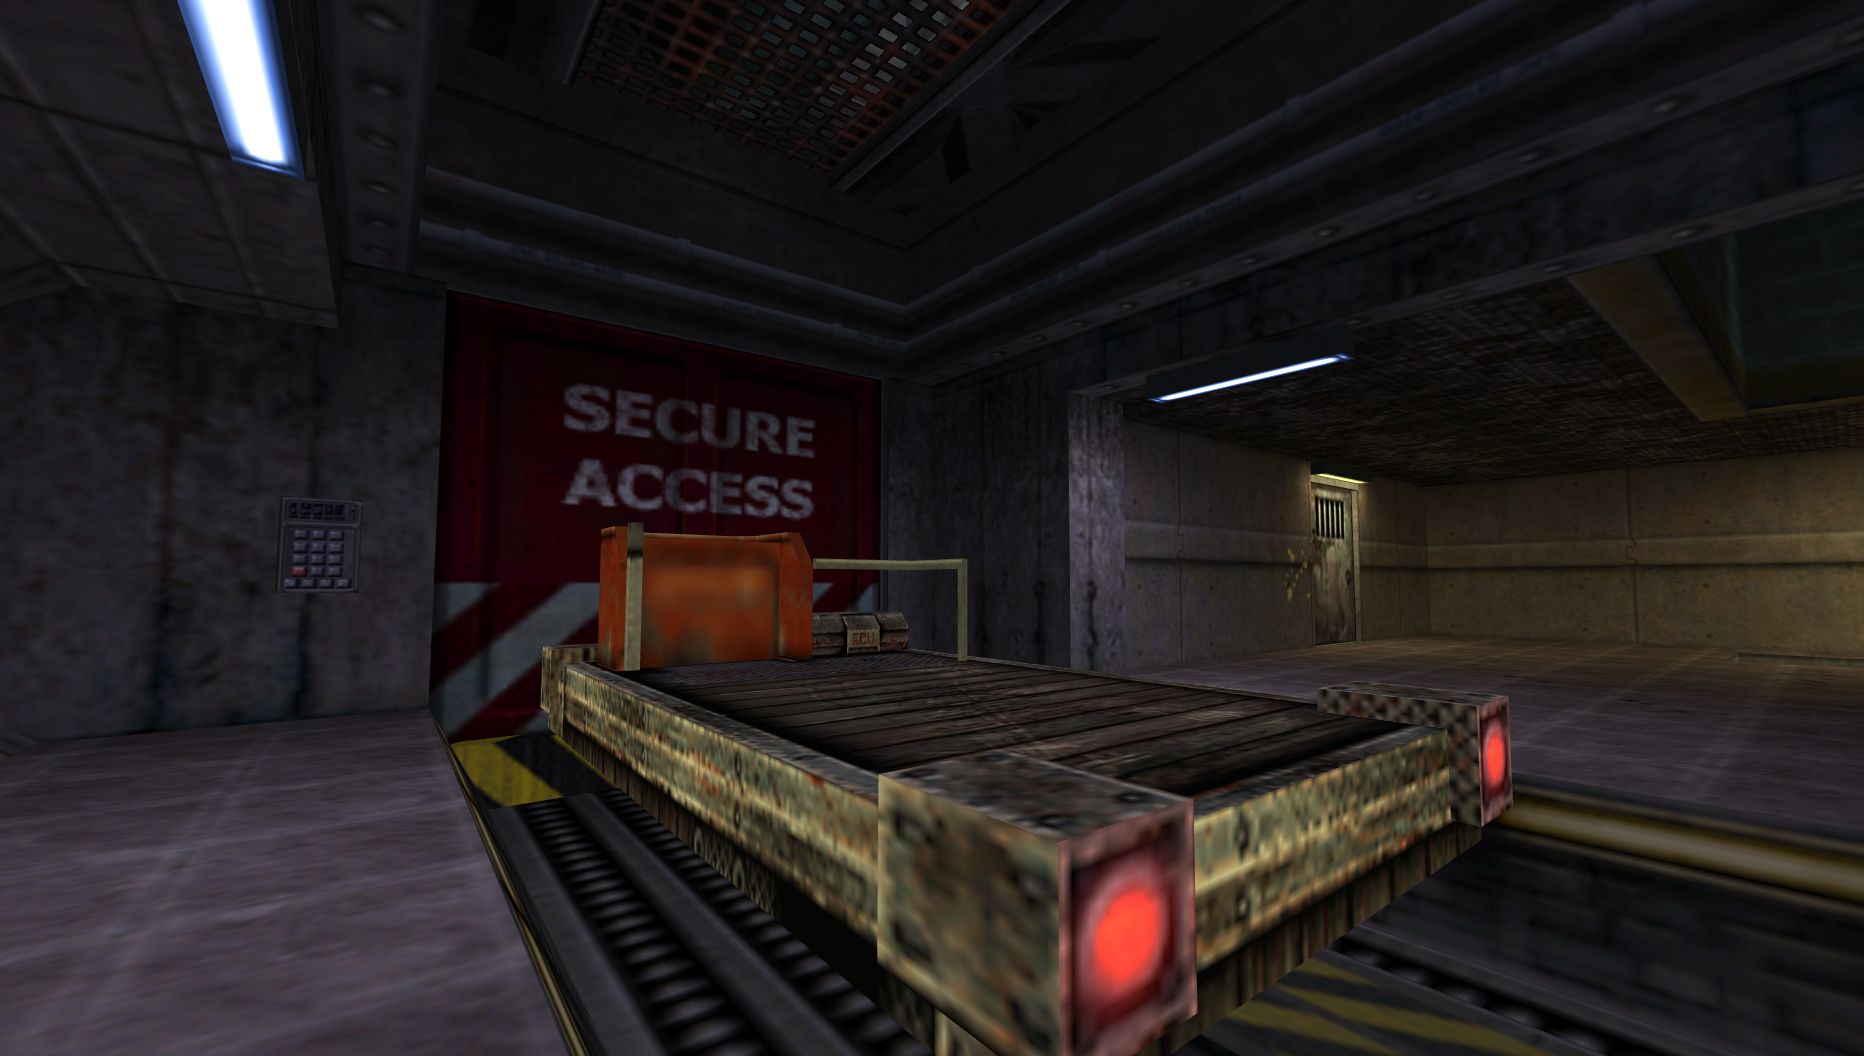 Half Life PS2 Jampack Summer 2002 Demo Conversion file - Yet another PS2  Half-Life PC port mod for Half-Life - Mod DB